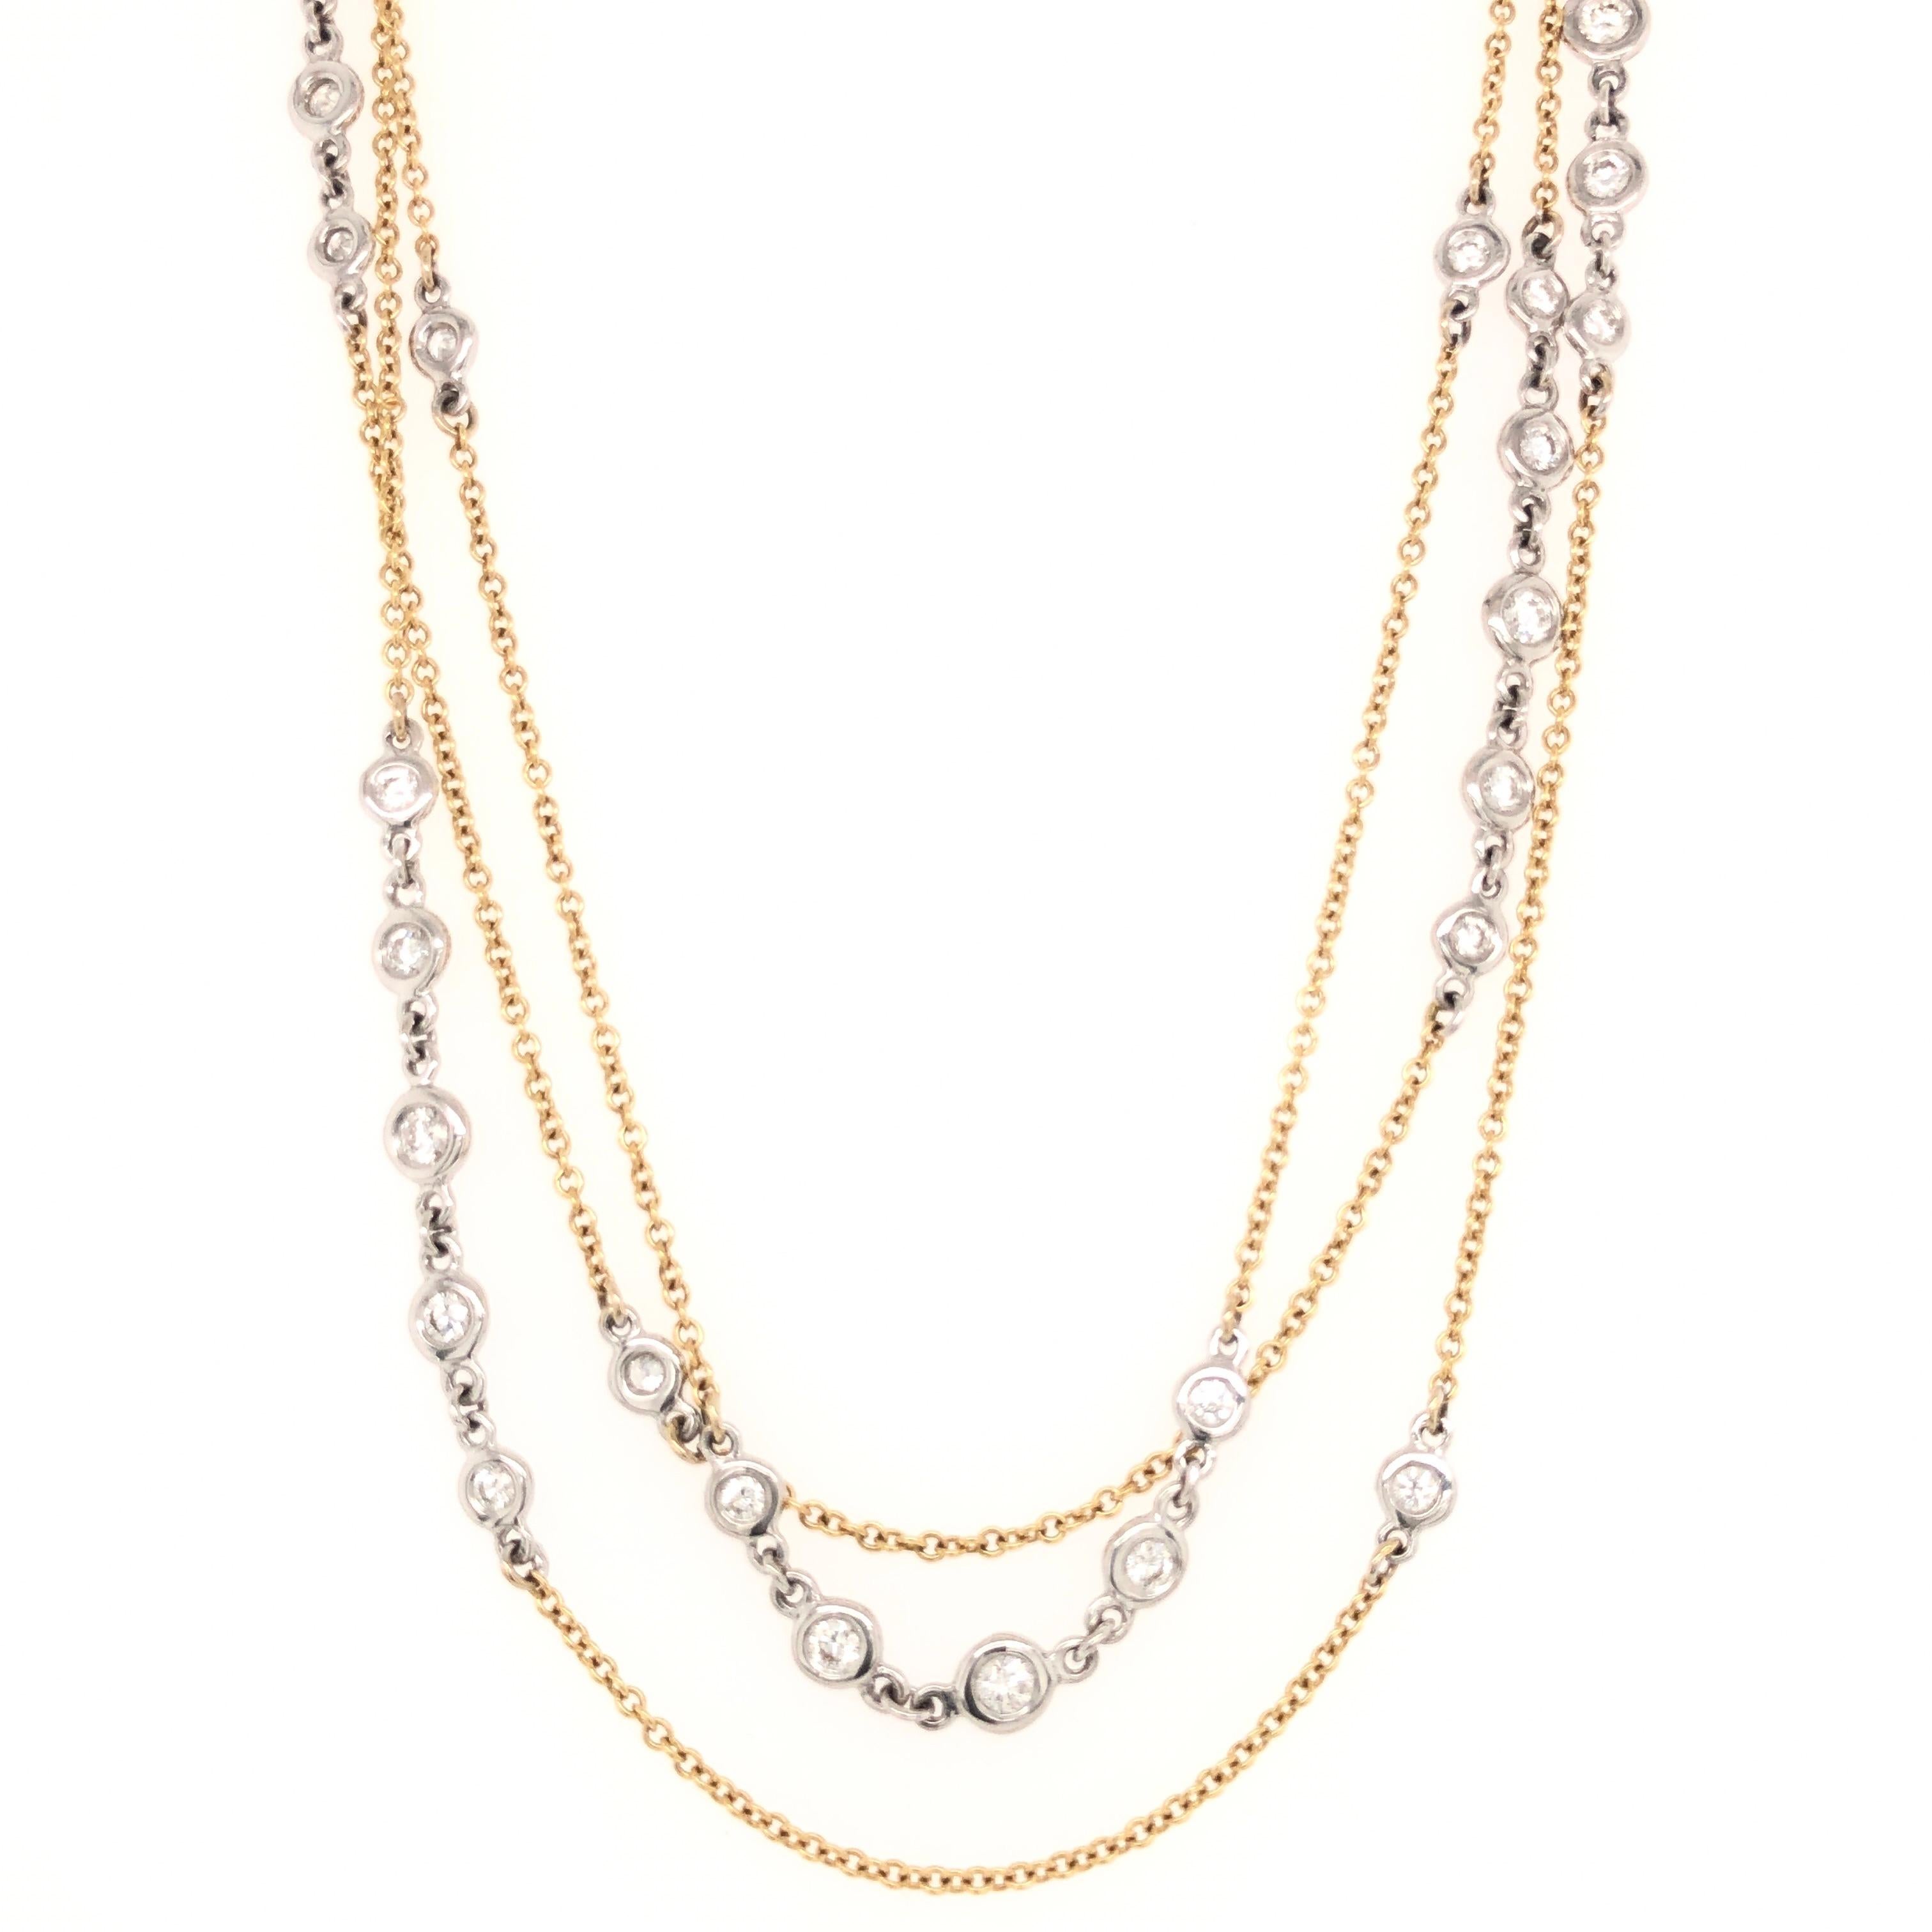  A Link Necklace Diamond Chain set in 18K White and Yellow Gold.  Wear this Diamond chain long or doubled.  This Necklace is so versatile.  The necklace has 41 Round Brilliant Diamonds bezel set in White gold creating a super brilliant Diamond link.